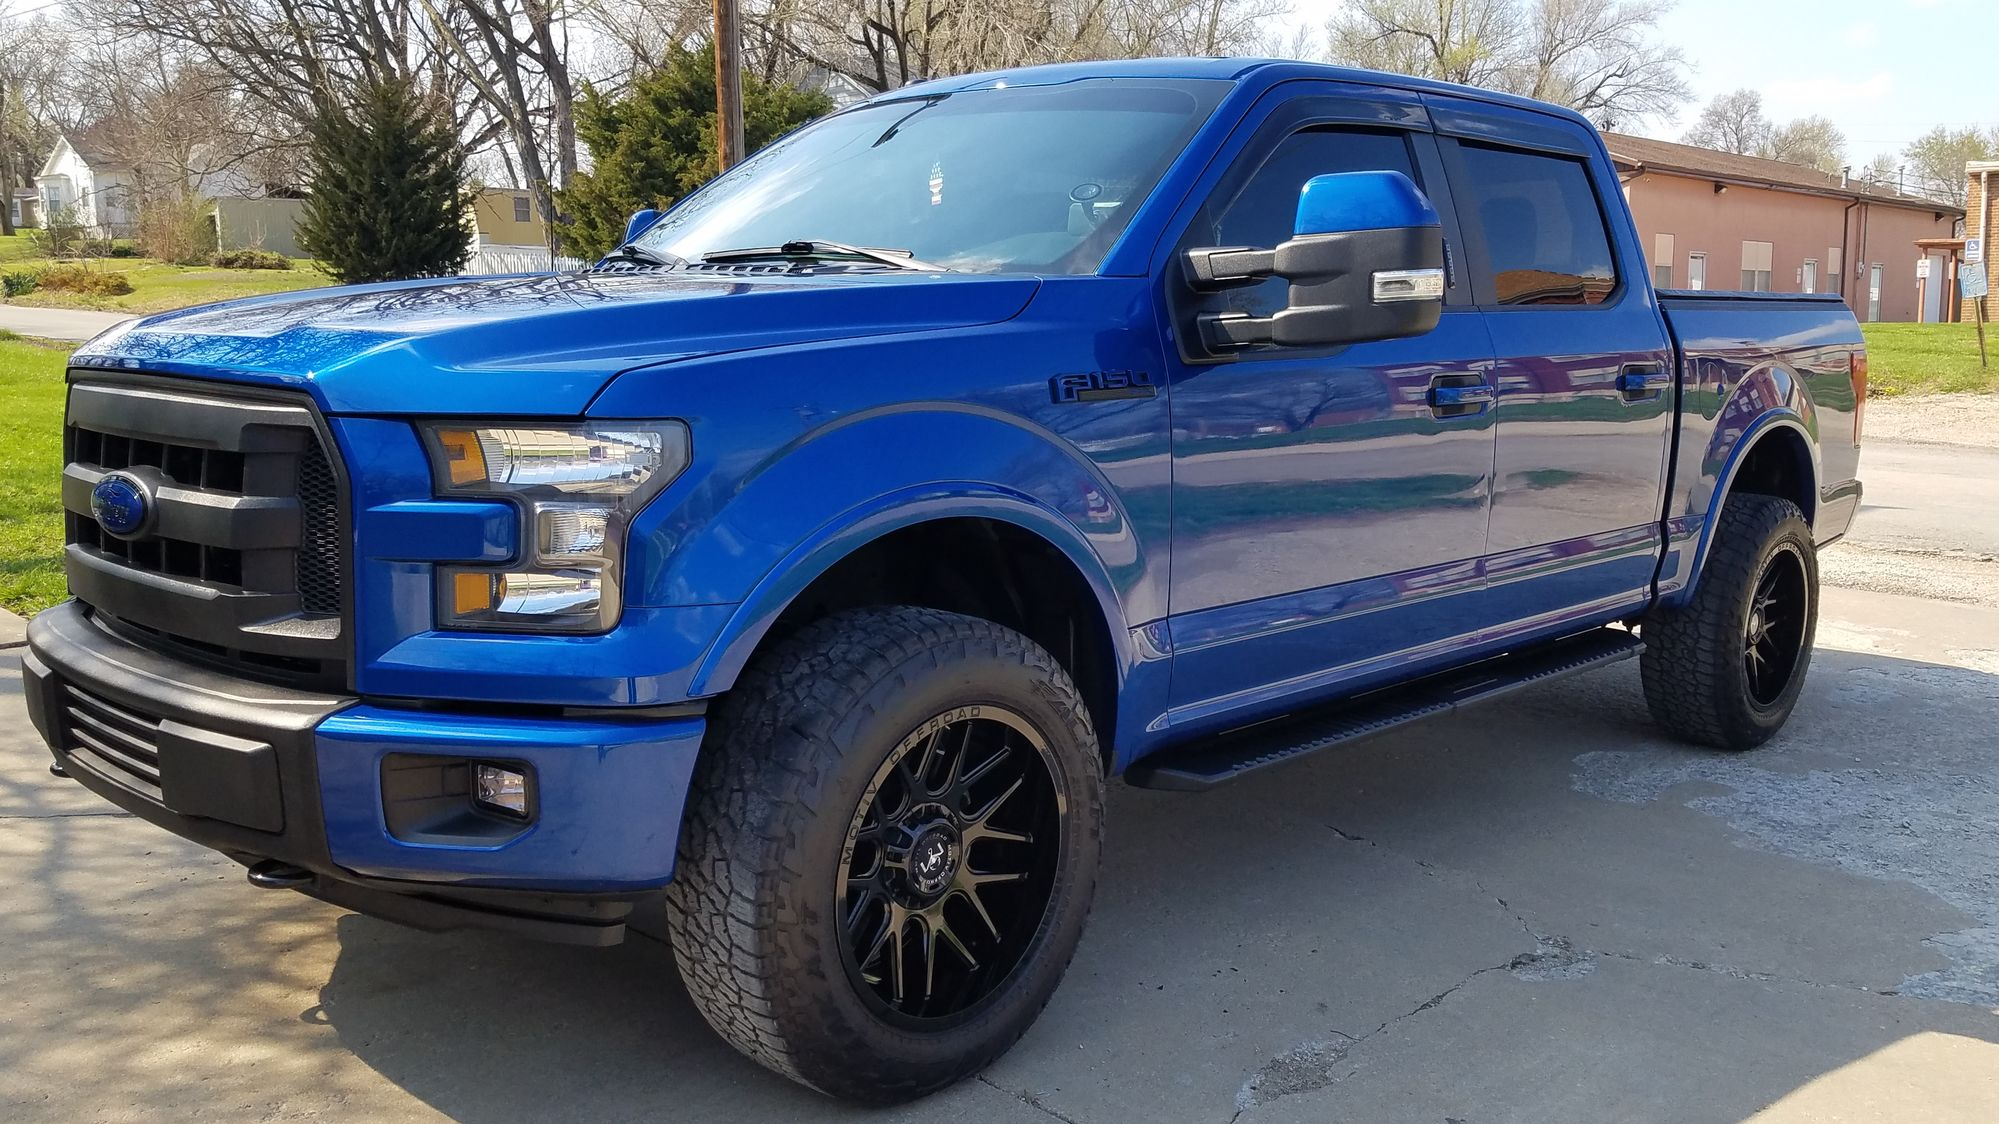 275/60r20 close up pics - Ford F150 Forum - Community of Ford Truck Fans